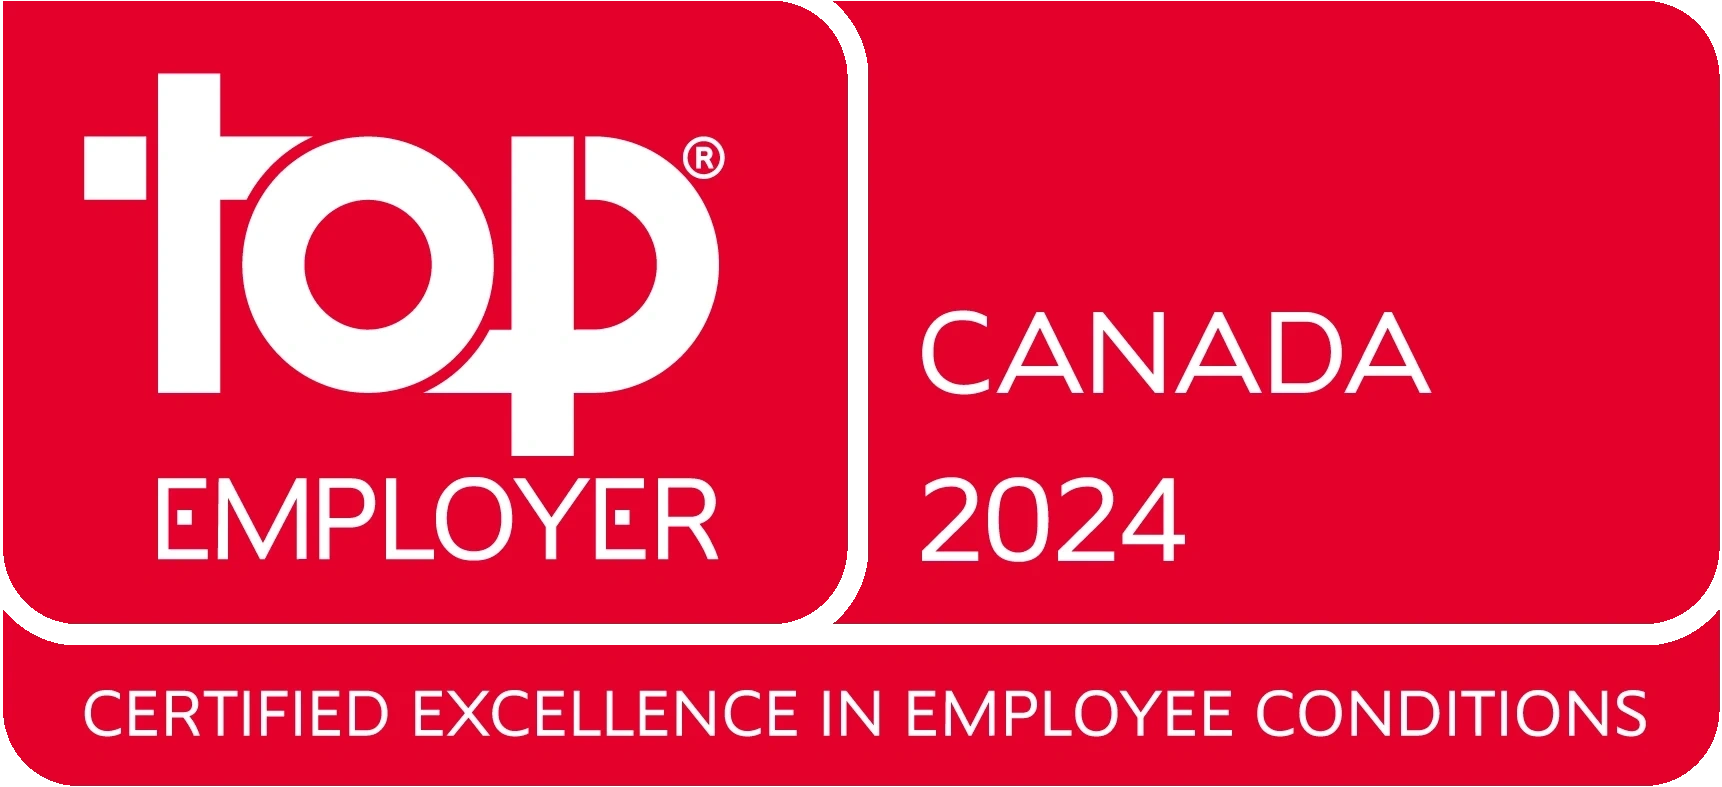 Global Top Employer in Canada